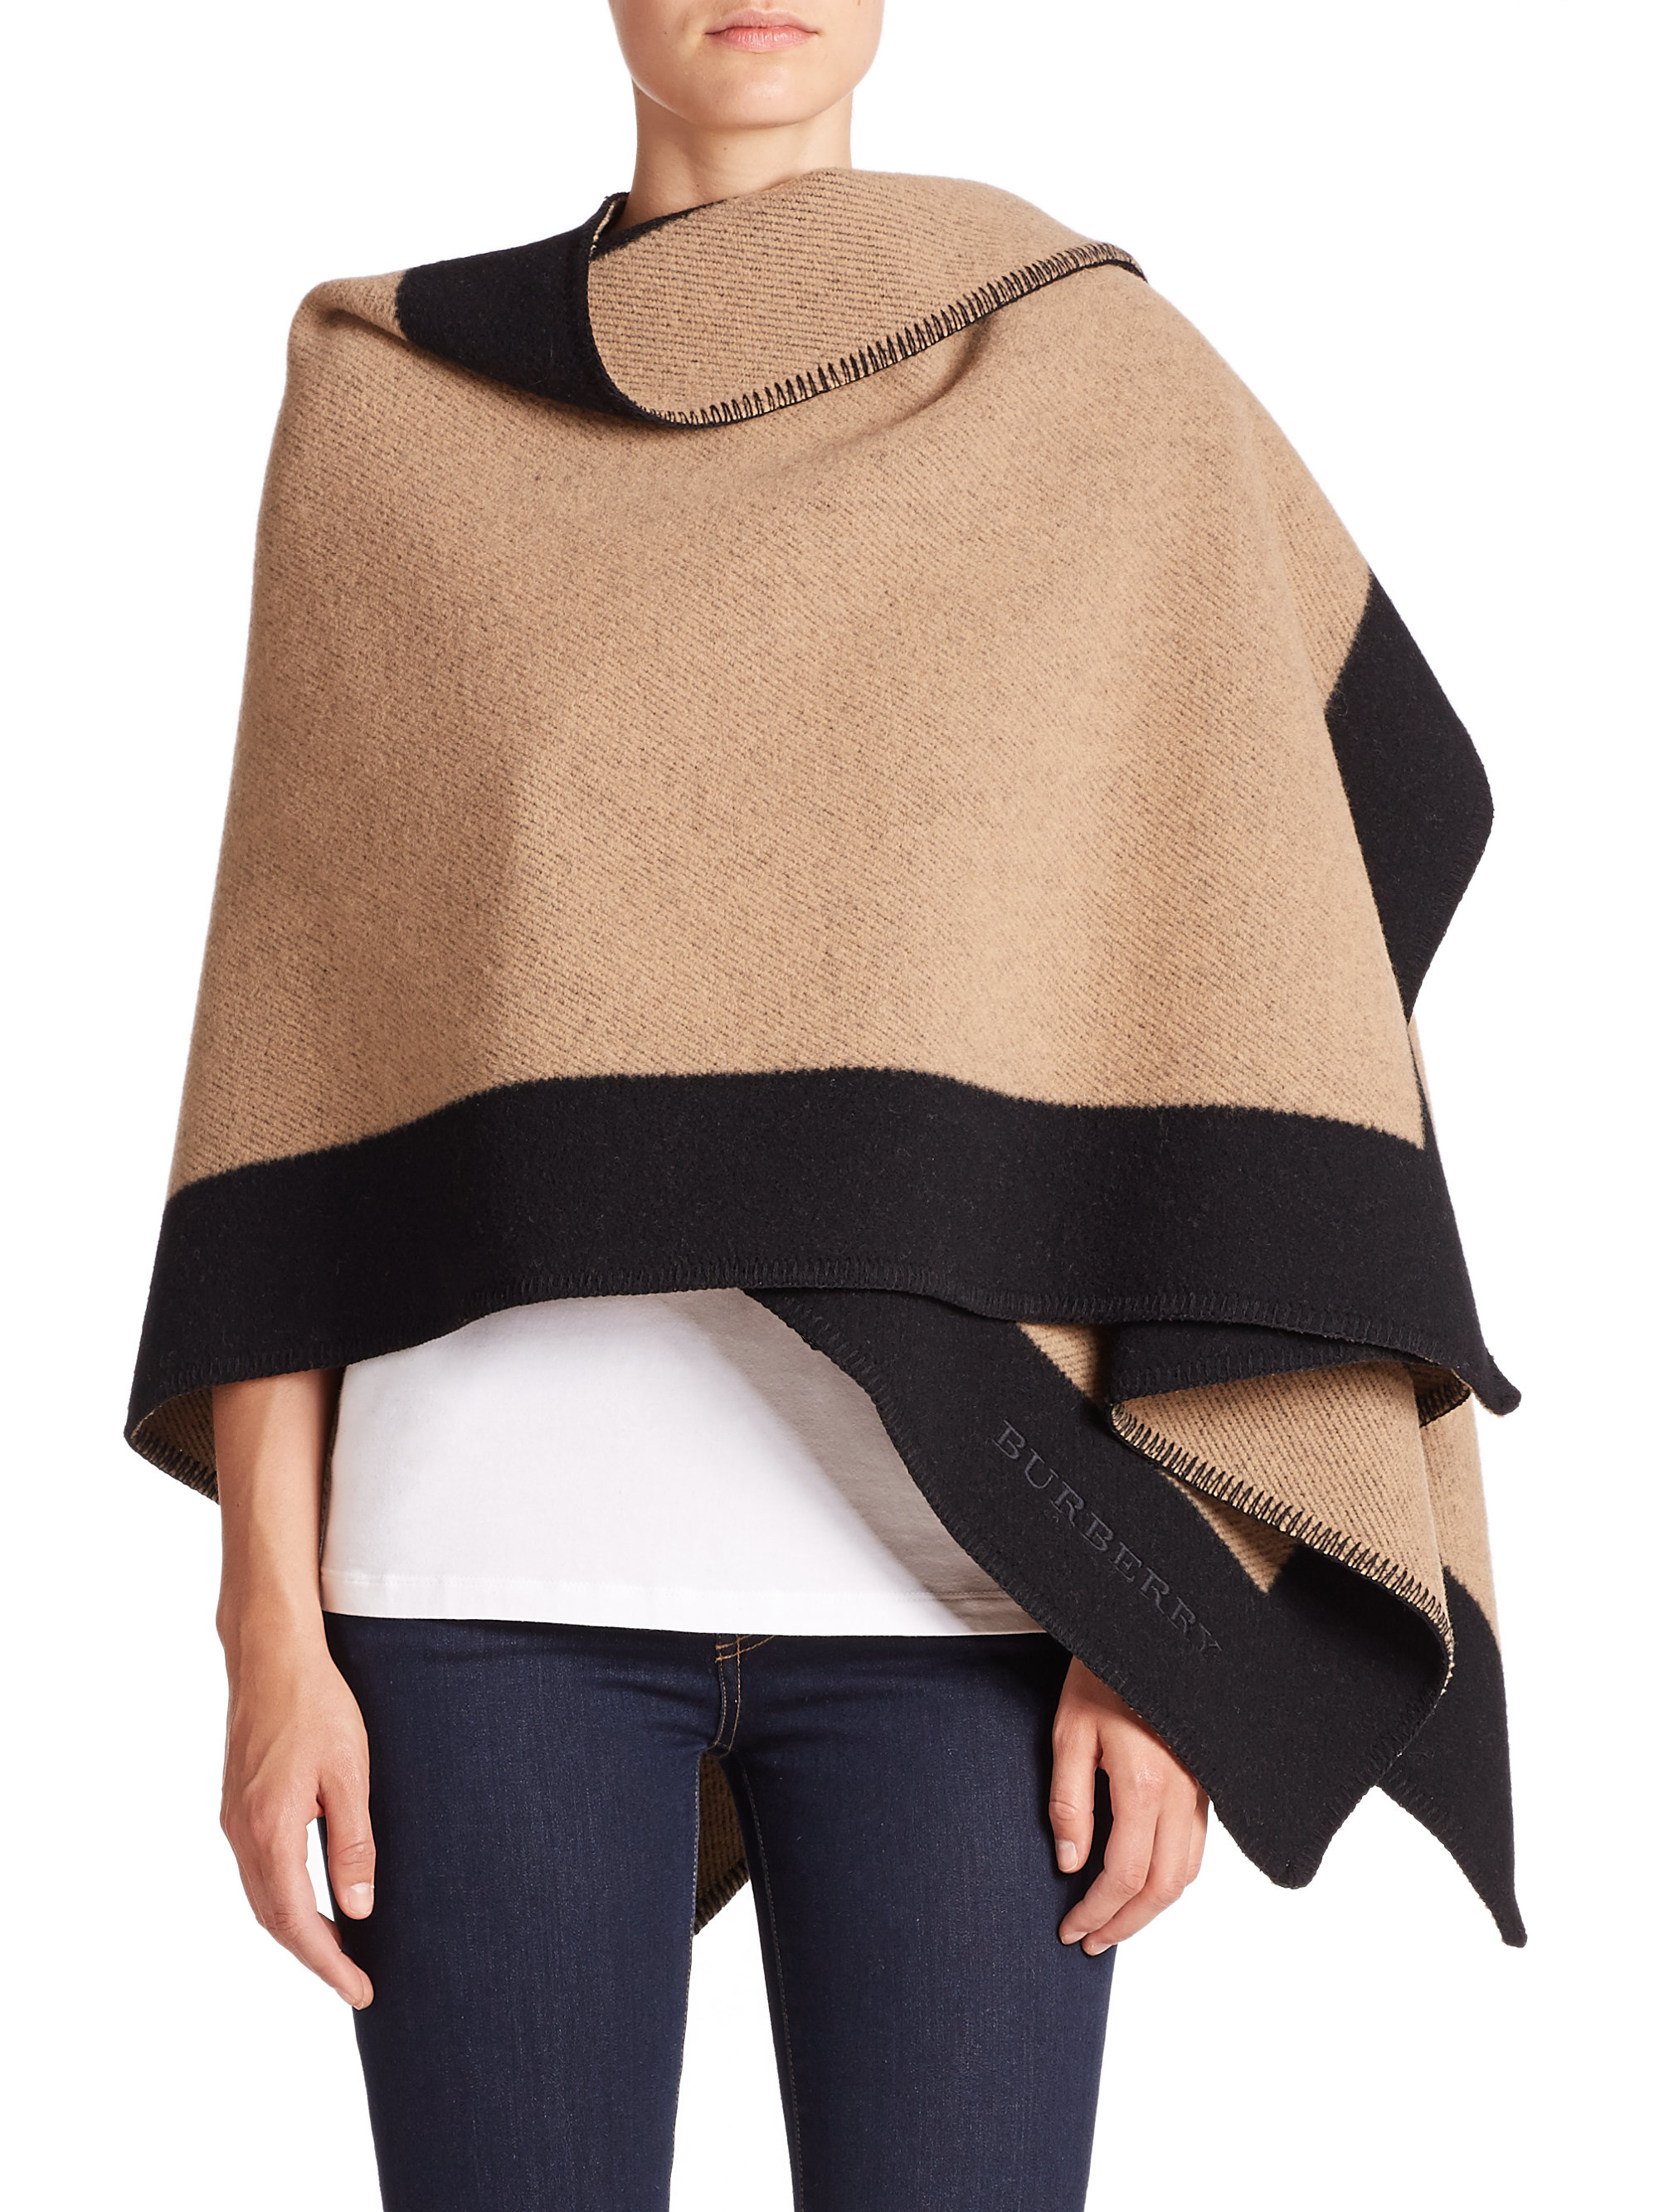 Lyst - Burberry Bordered Wool & Cashmere Shawl in Brown